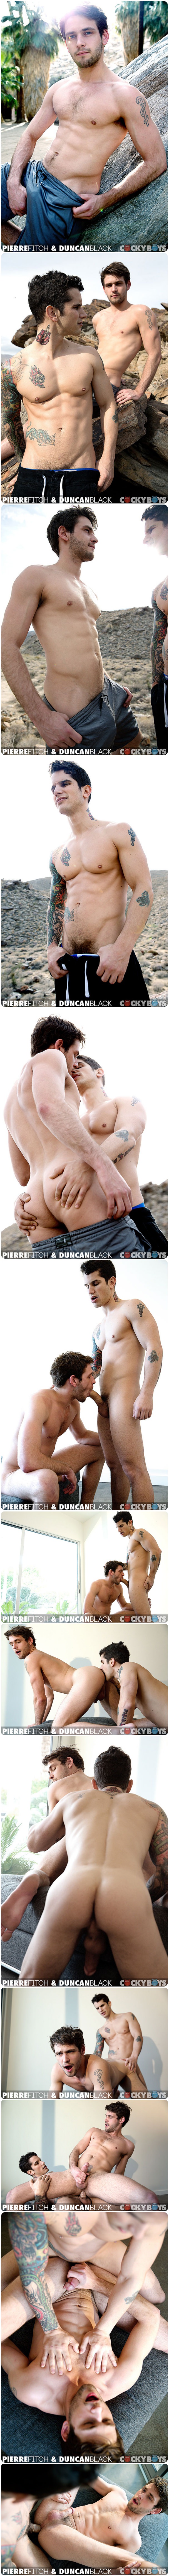 cockyboys-duncan-black-pierre-fitch